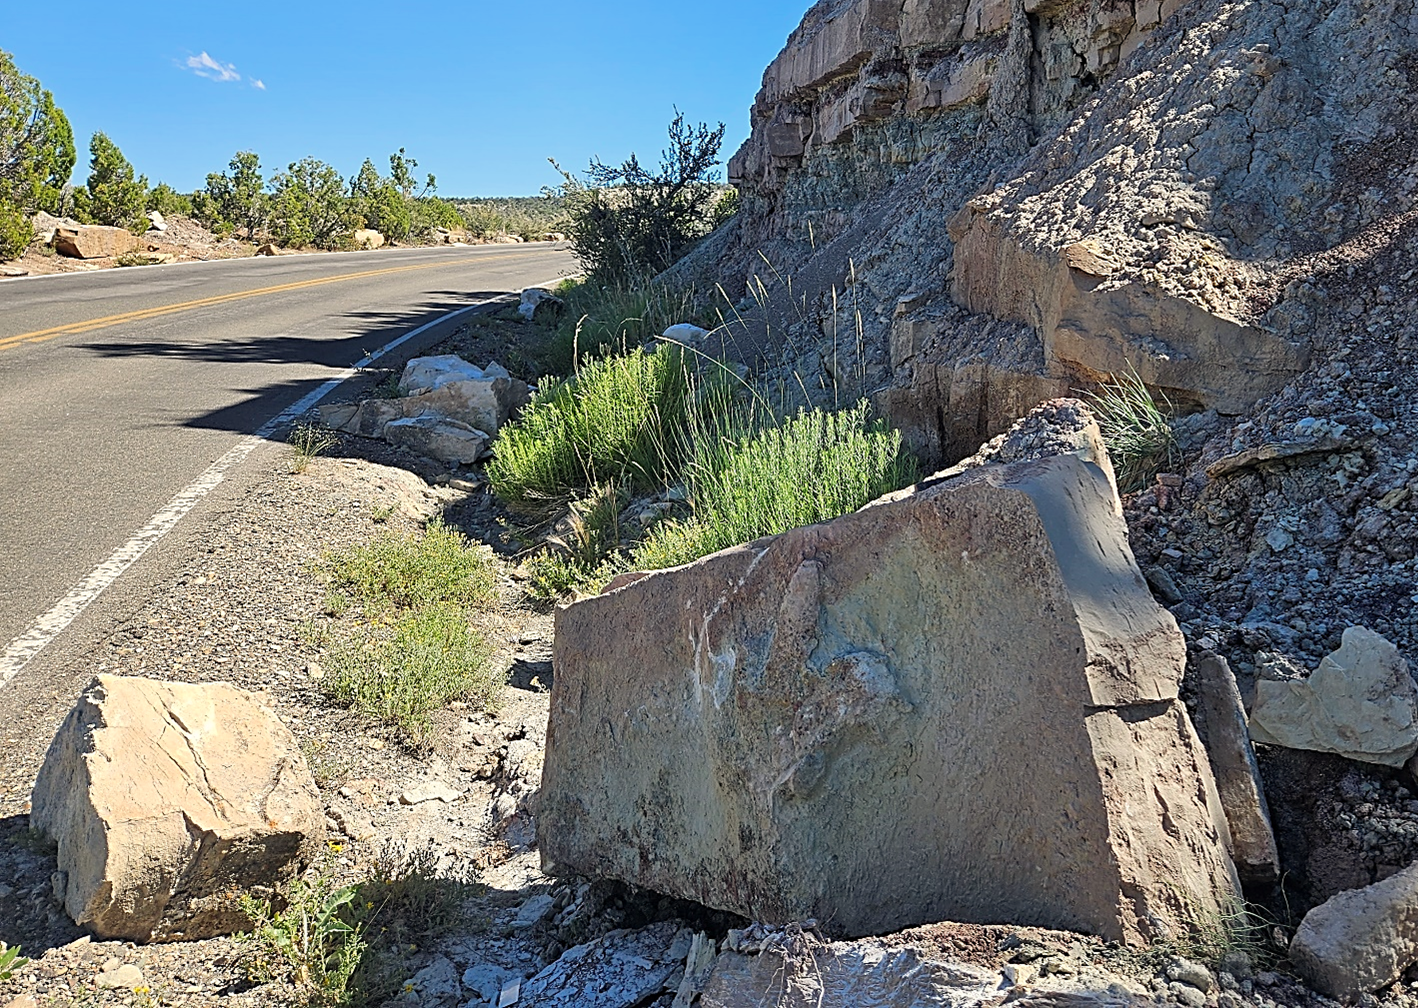 Photo of boulders at the base of a roadside bluff.